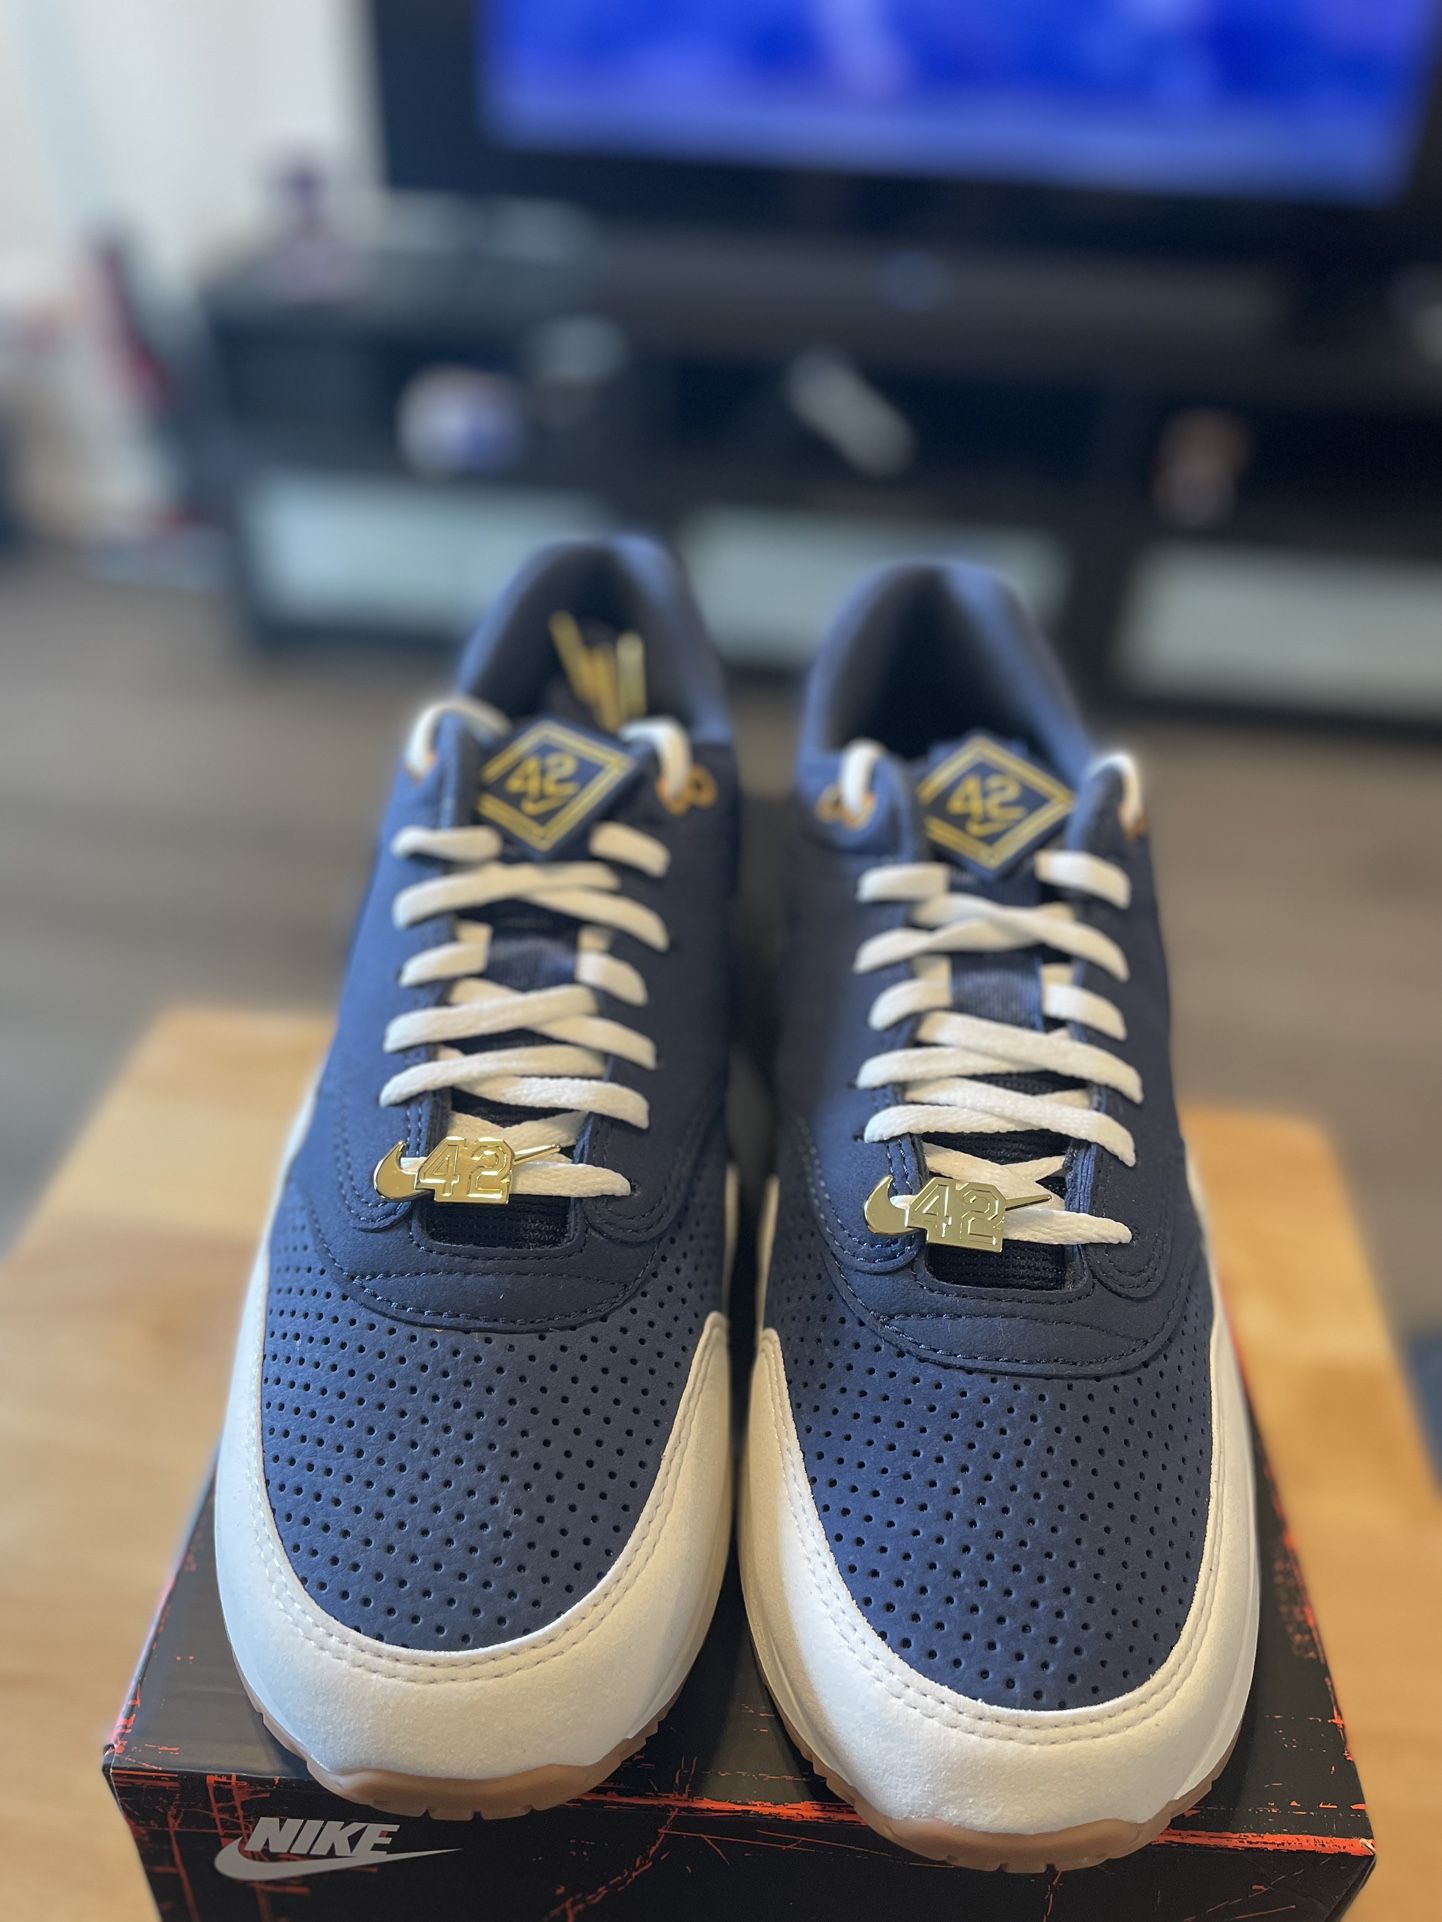 Nike Air Max ‘86 Jackie Robinson New Size 12 With Proof Of Purchase 🧾 $315